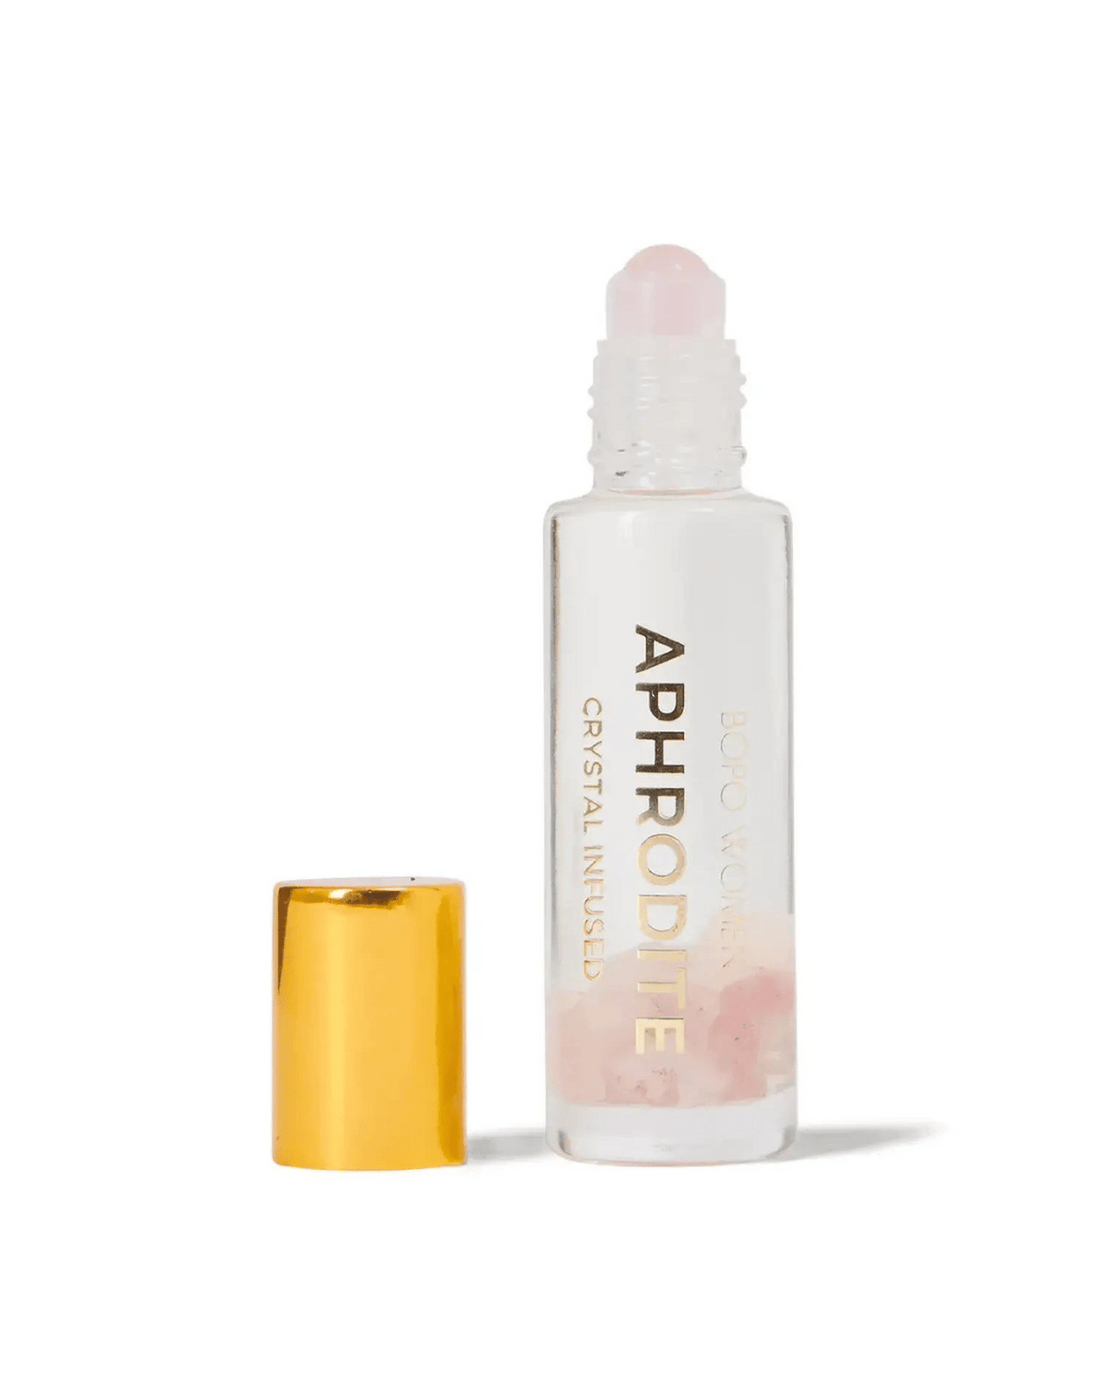 Aphrodite Crystal Infused Natural Perfume Roller by Bopo Women (15ml)